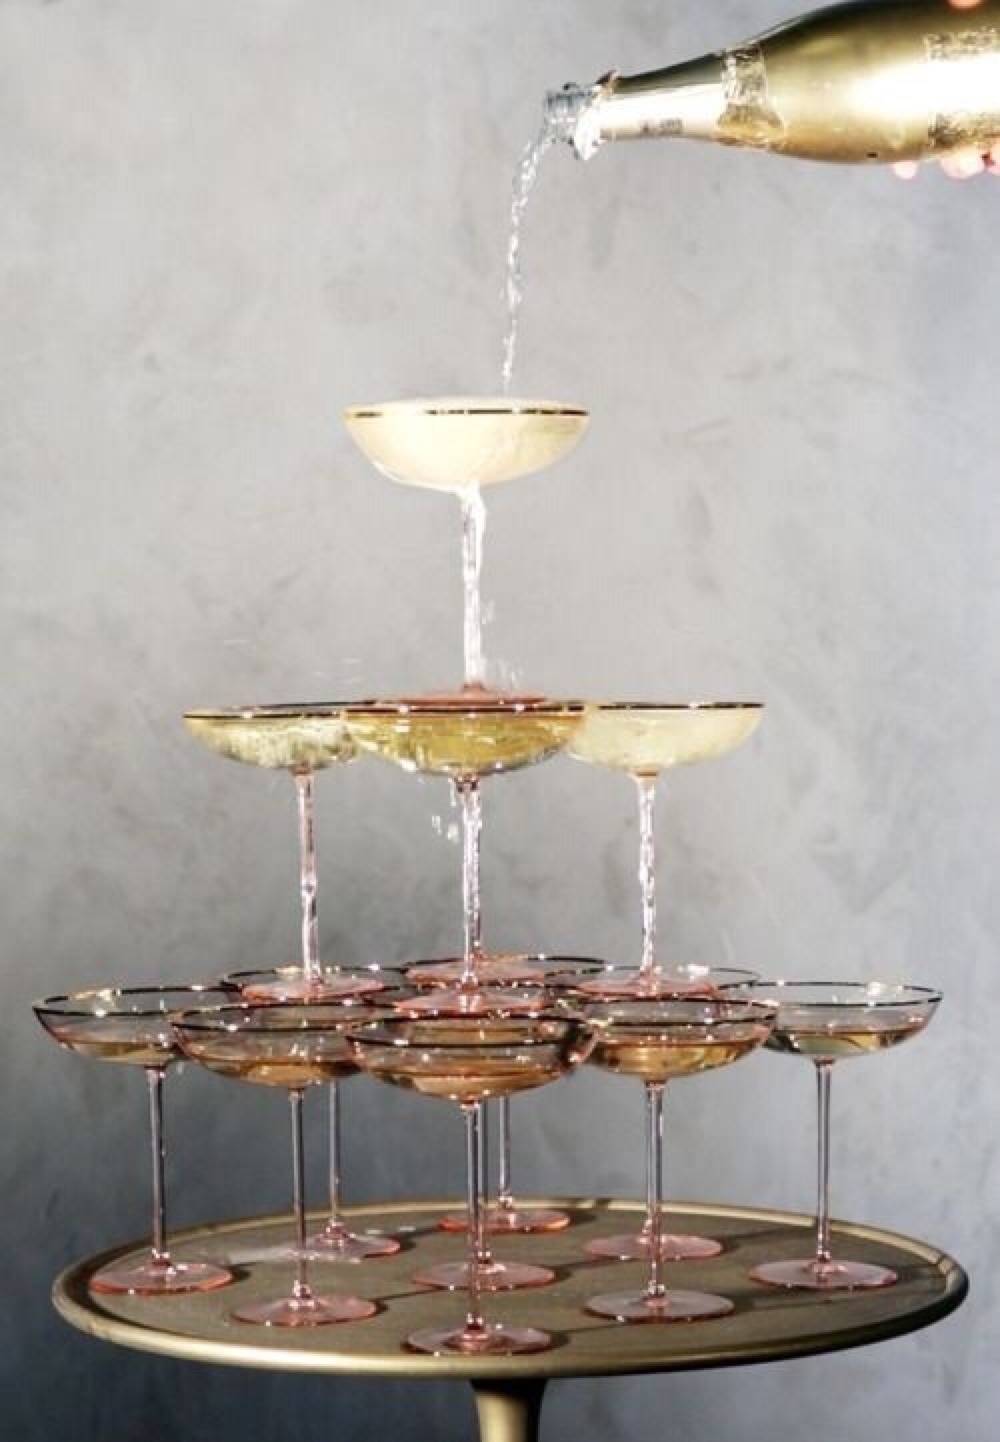 fran acciardo this weeks top 10: it's my 23rd birthday champagne tower